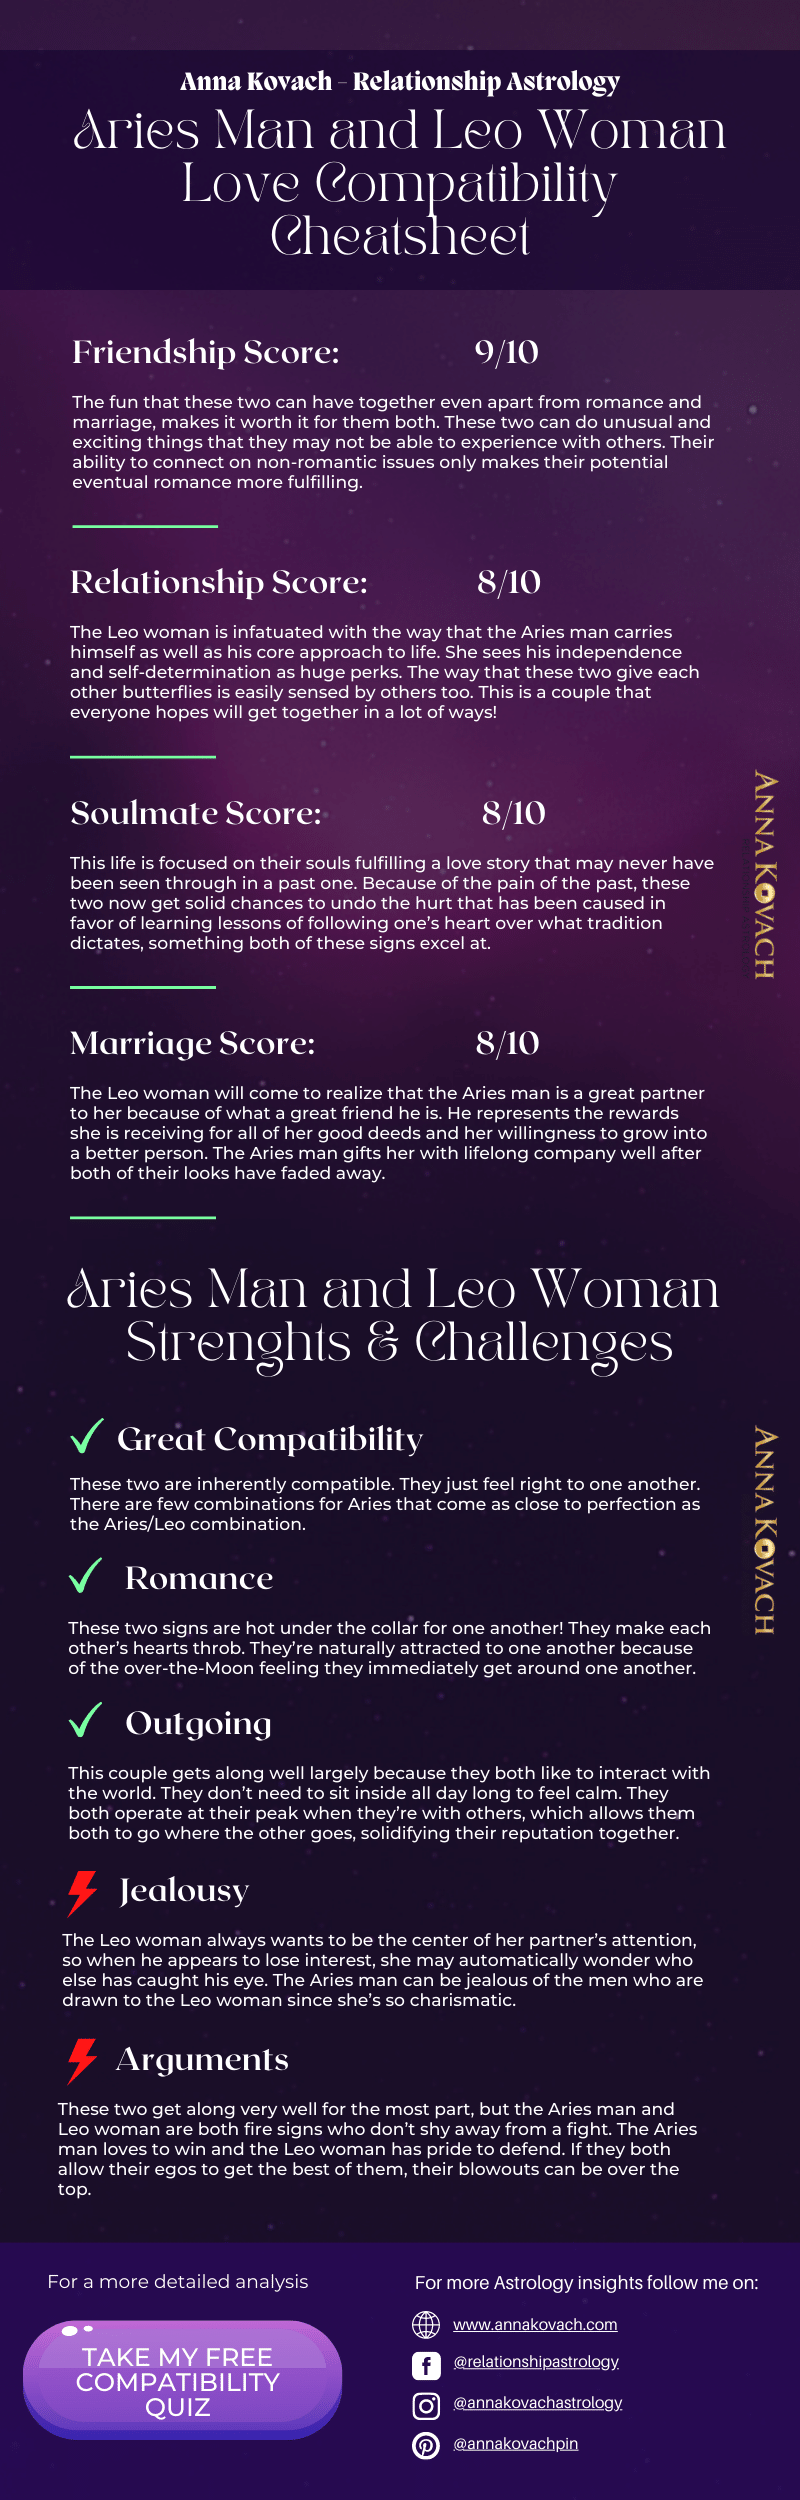 aries man leo woman love compatibility infographic